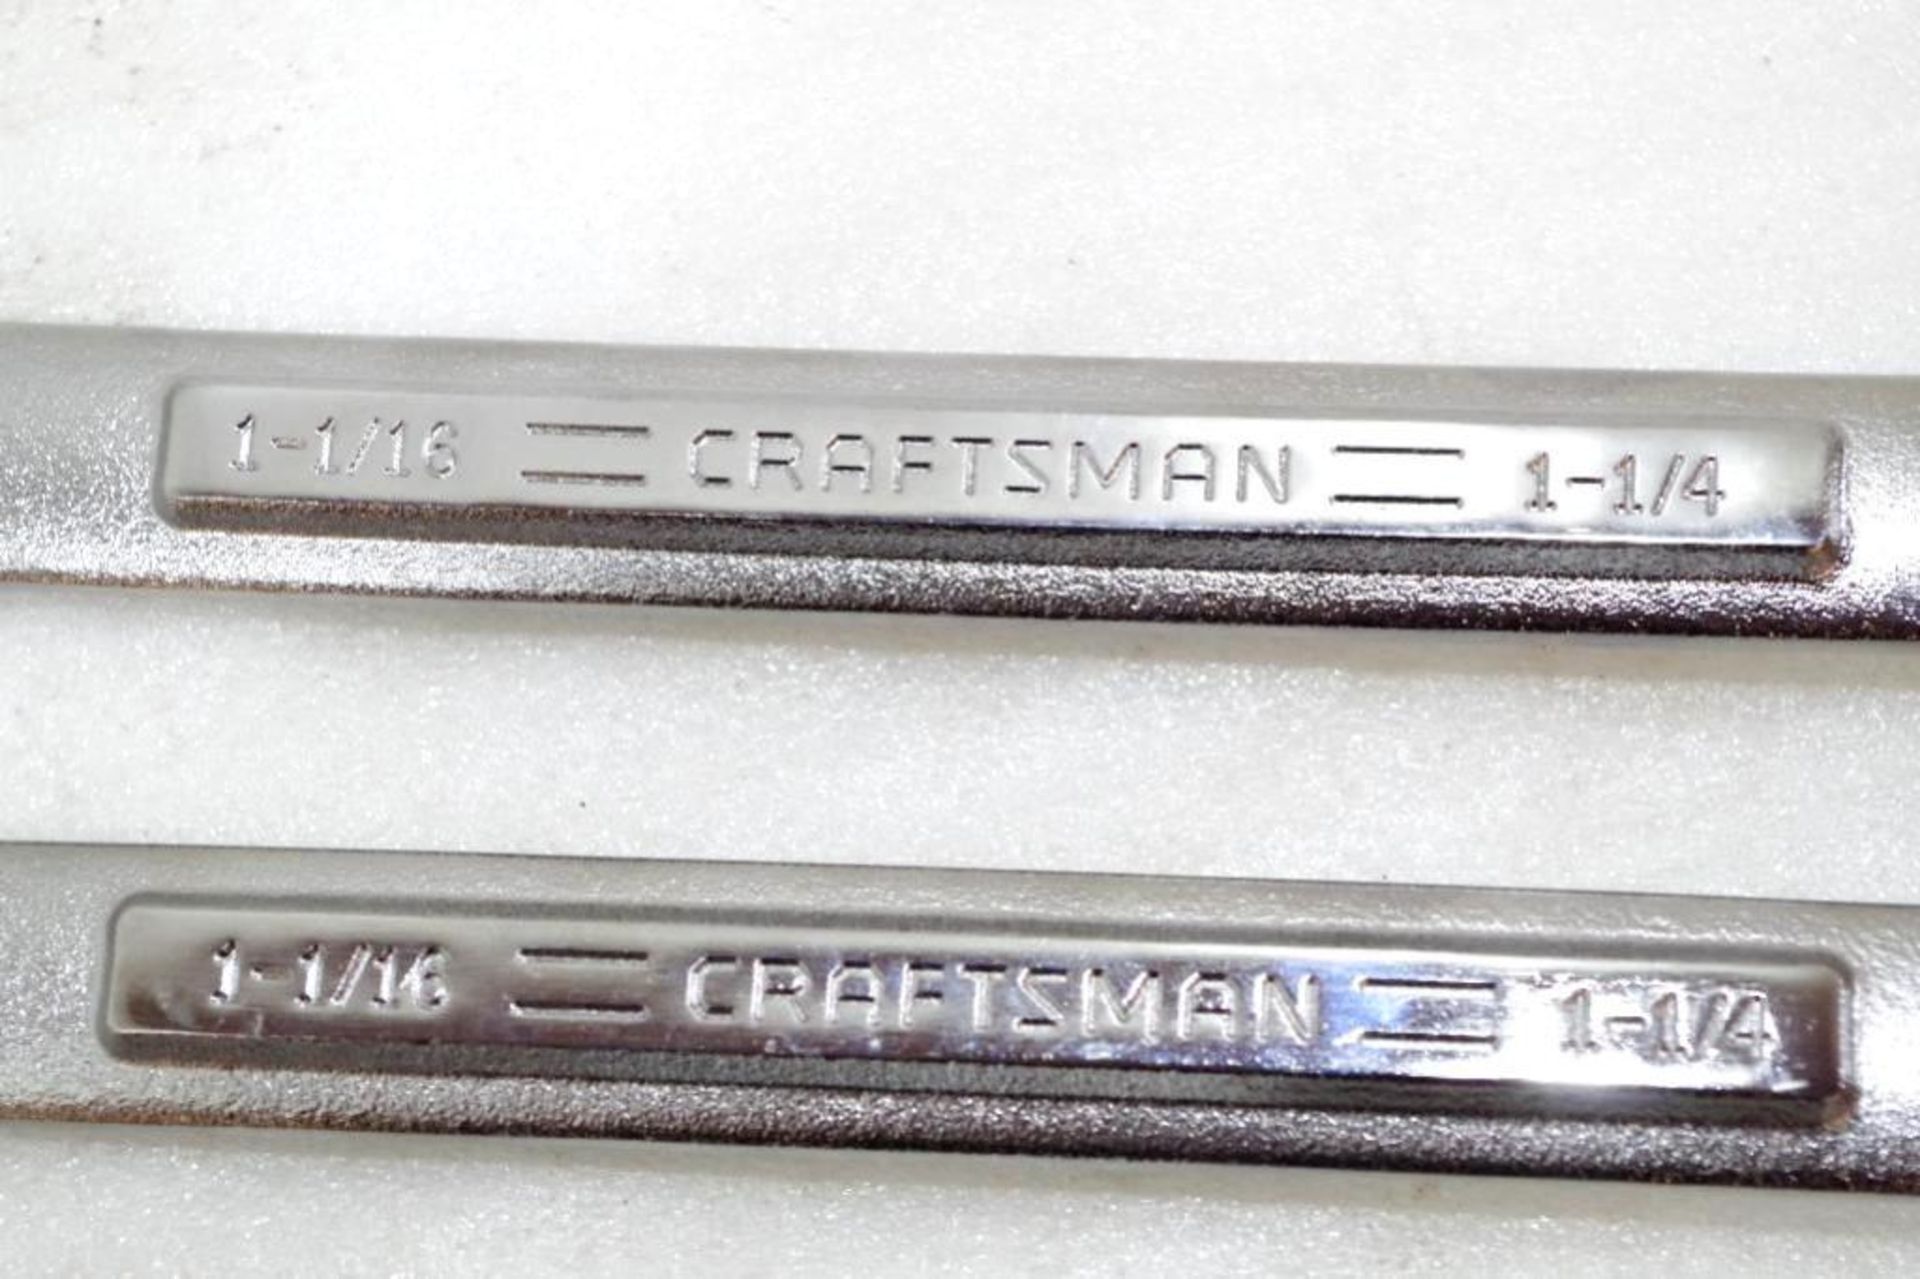 [4] NEW CRAFTSMAN Box-End Wrenches, Forged in USA - Image 2 of 4